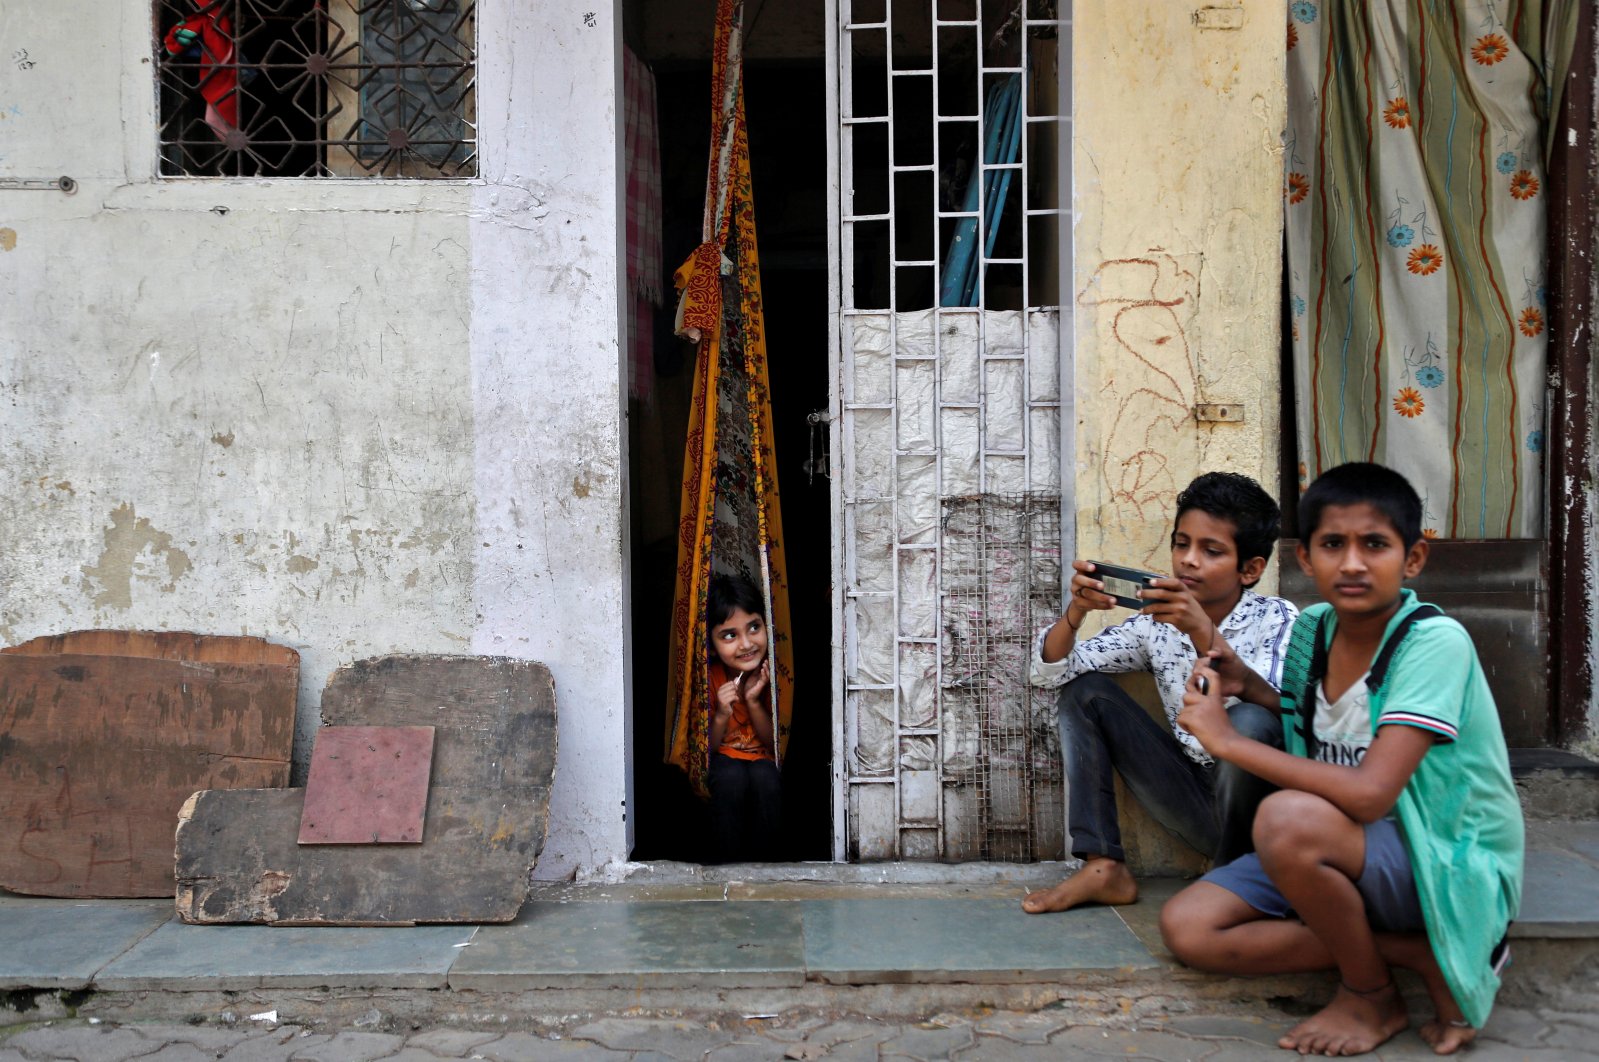 Children play outside a house during a nationwide lockdown in India to slow the spread of COVID-19, in Dharavi, one of Asia's largest slums, during the coronavirus disease outbreak, in Mumbai, India, April 10, 2020. (Reuters Photo)